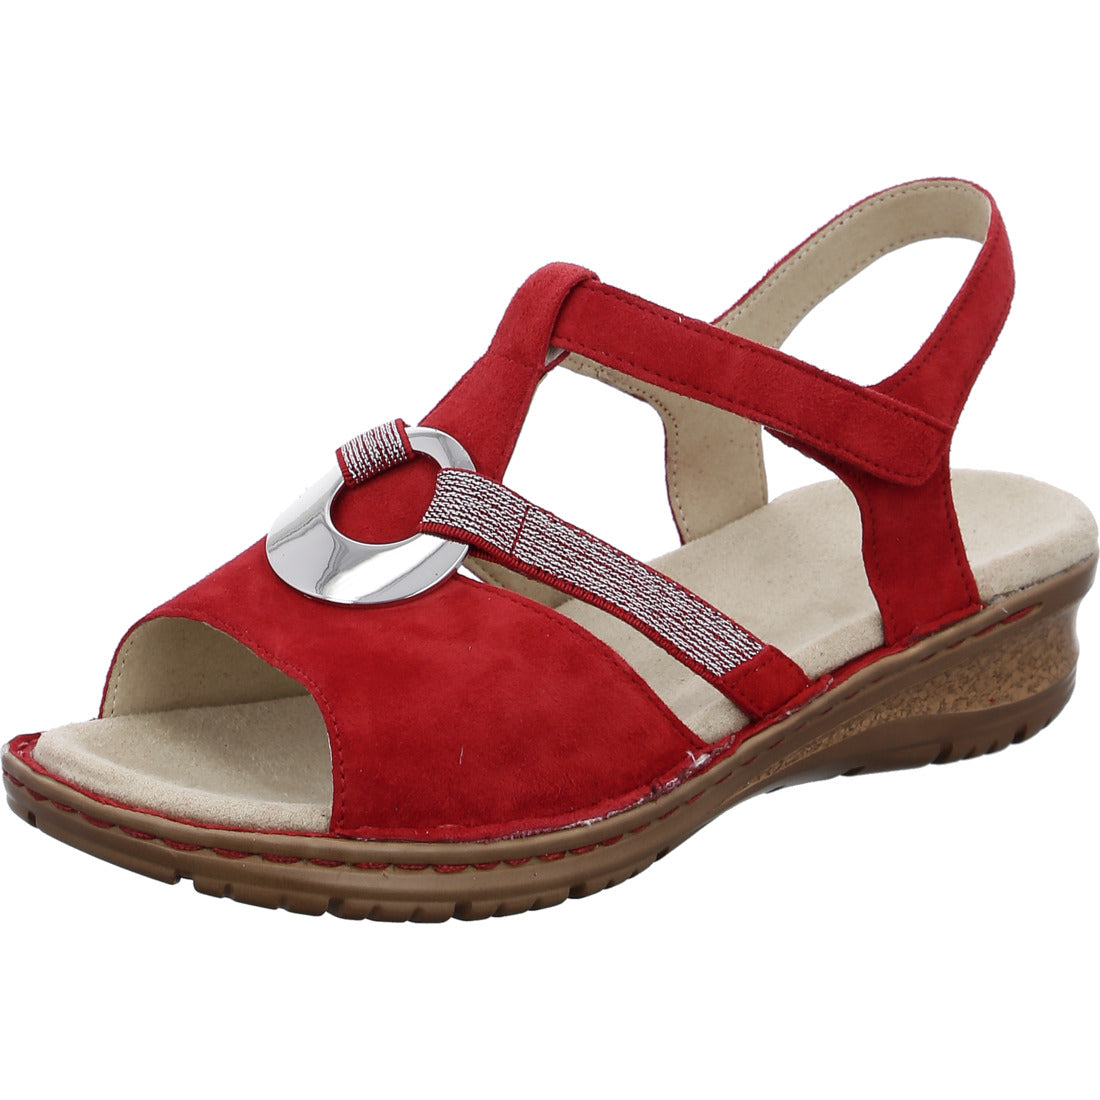 Ara 12-27272 76 Red Suede Hawaii G Fitting Velcro Sandals with Slingback Strap